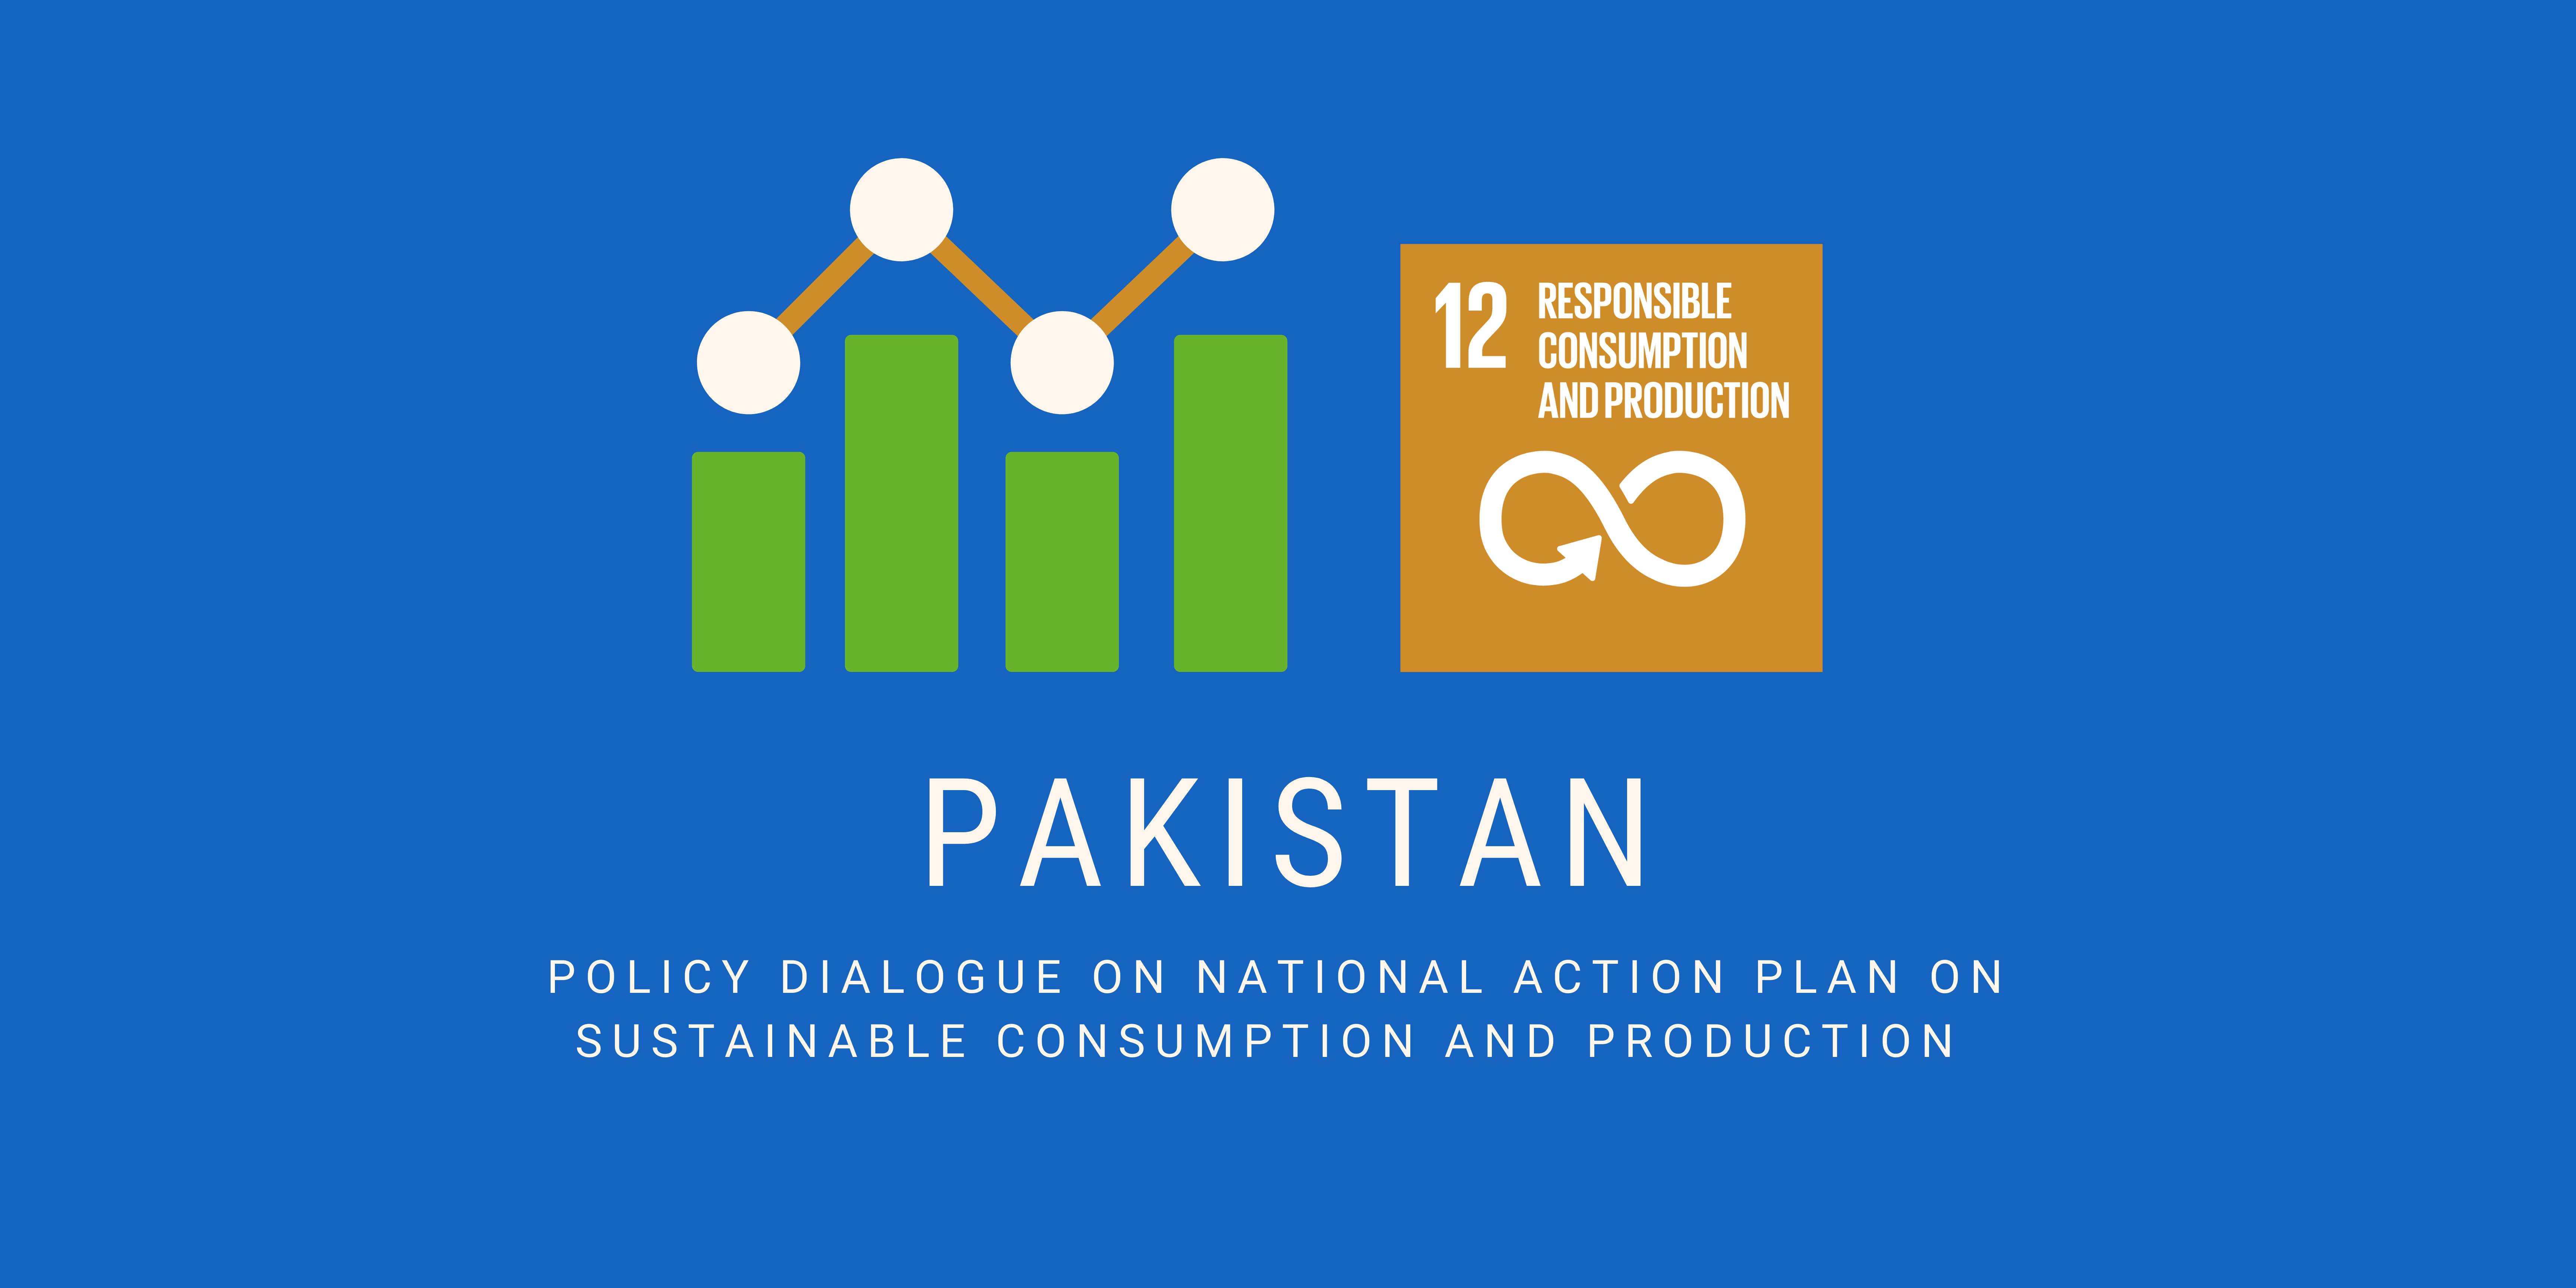 Data collection on SDG 12 key to monitoring overconsumption trends and taking actions to reduce carbon emissions in Pakistan